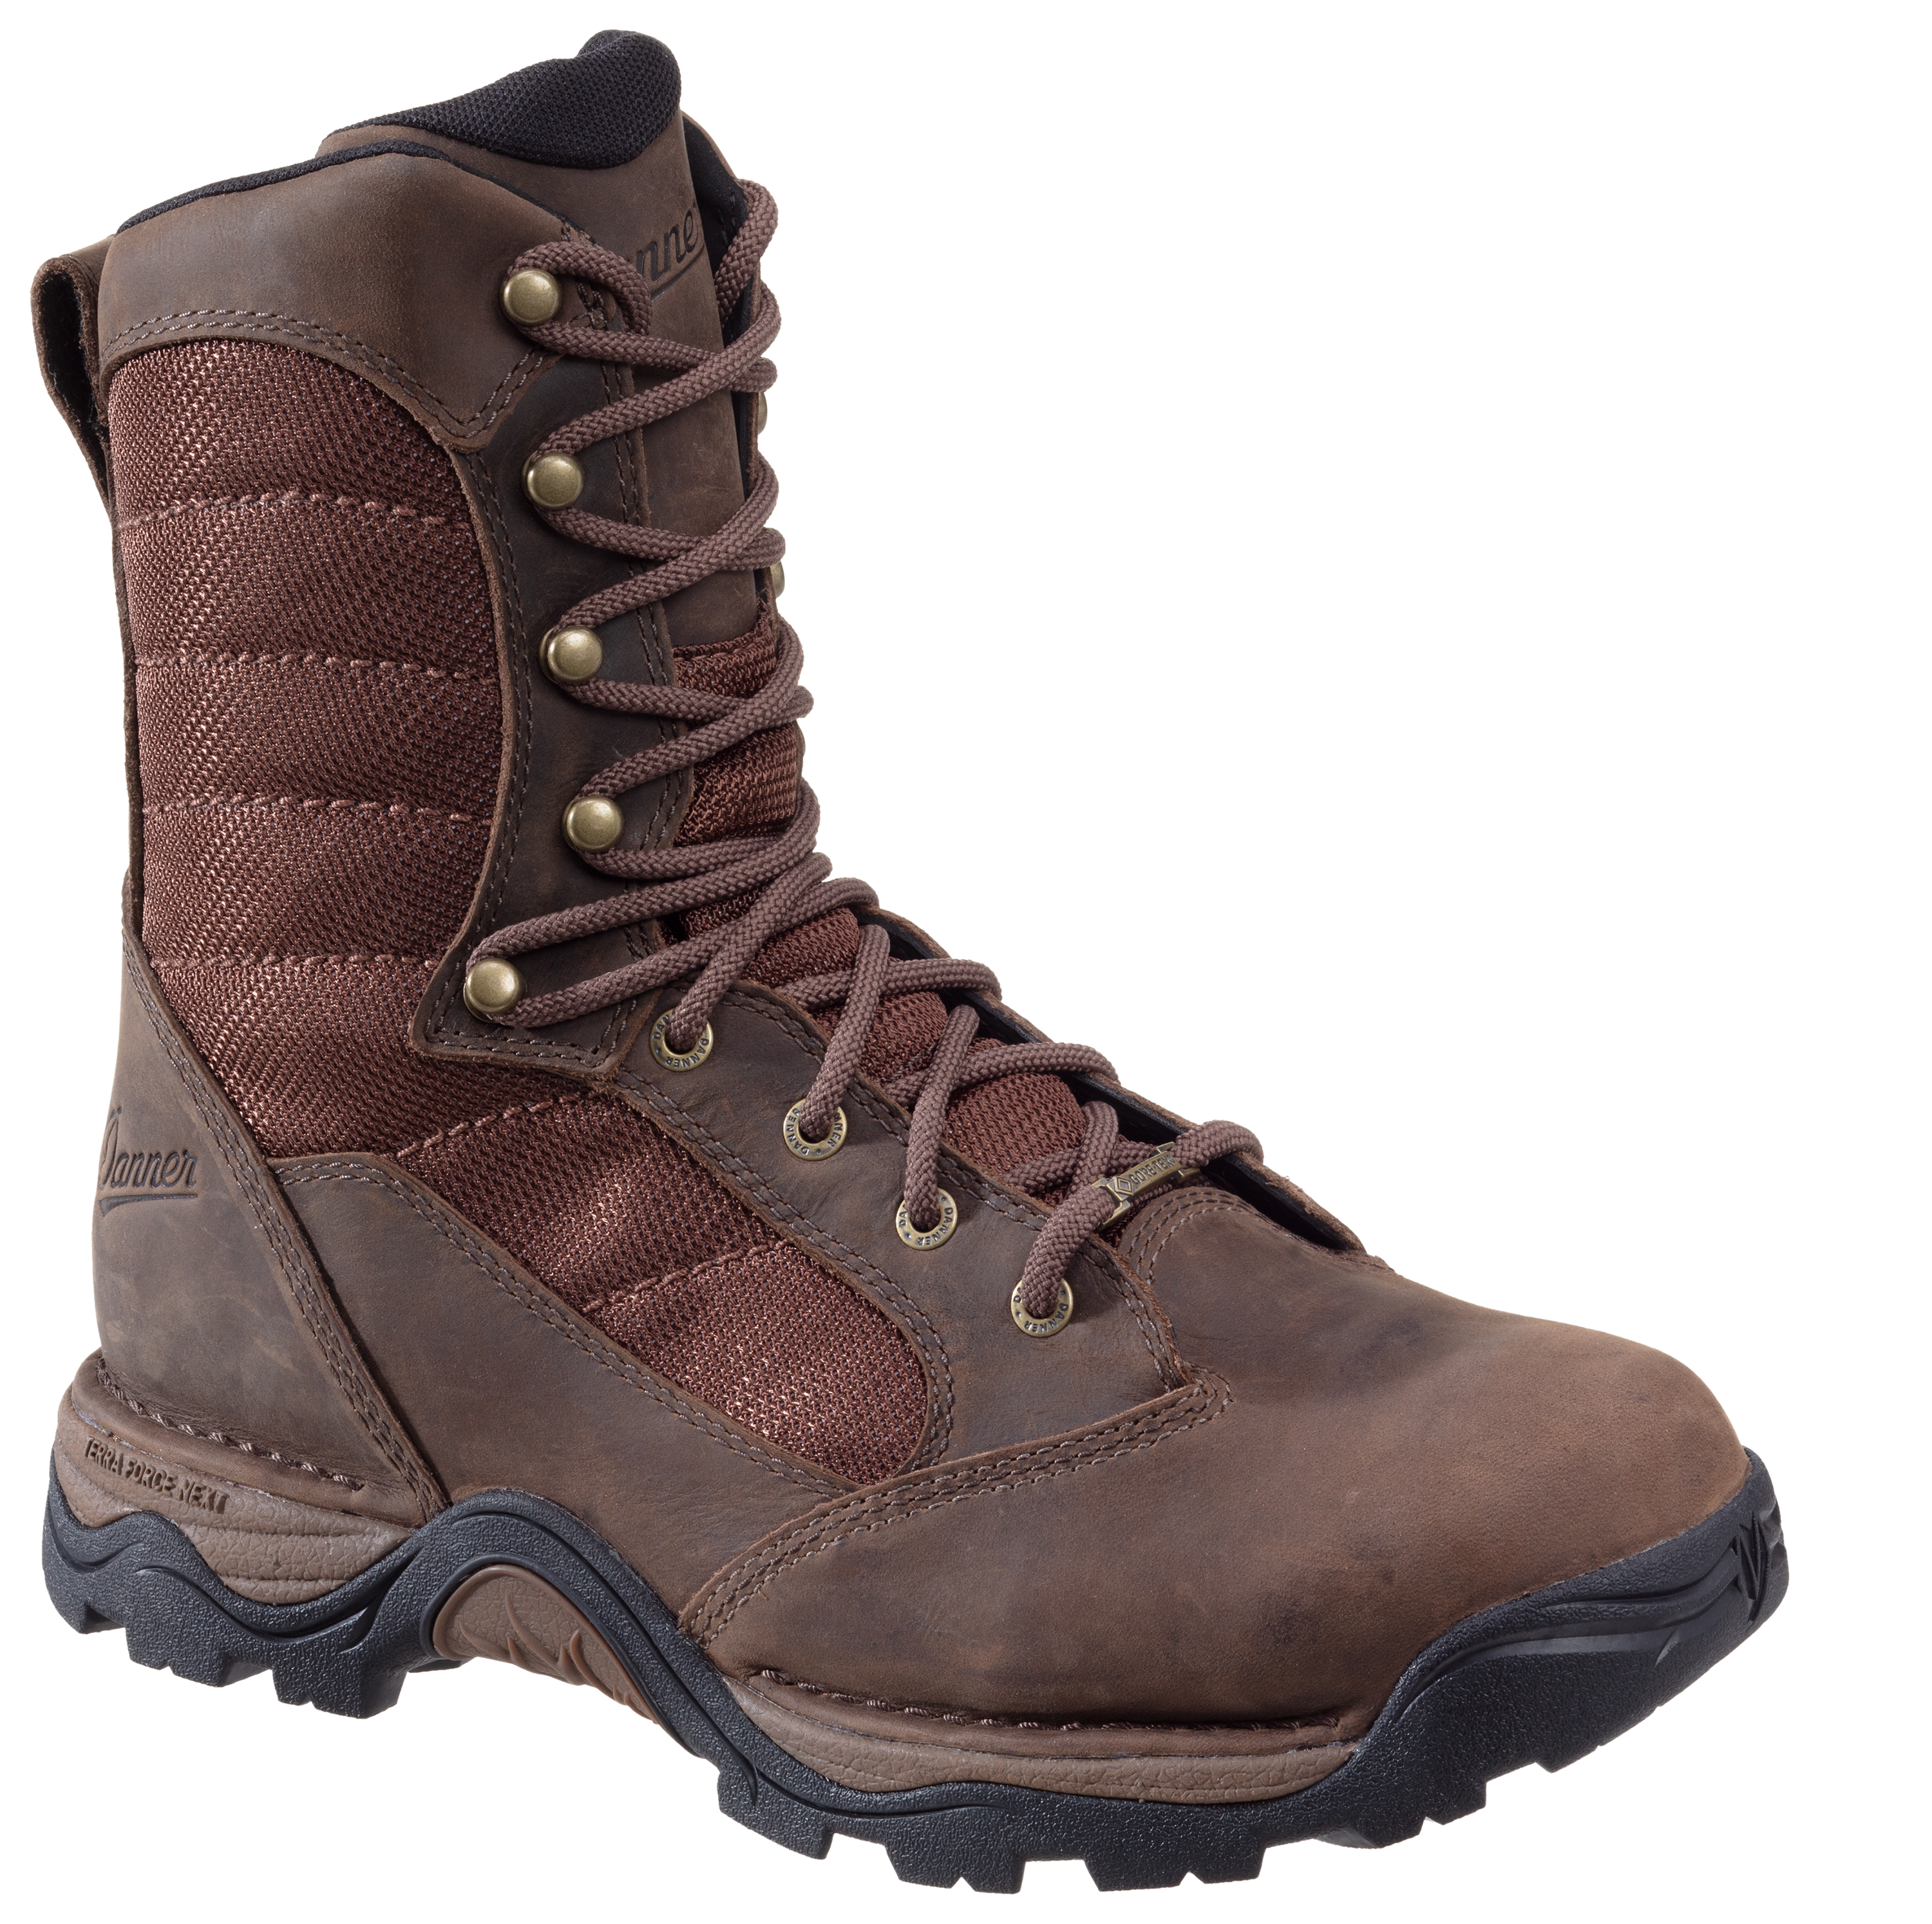 Danner Pronghorn GORE-TEX Hunting Boots for Men